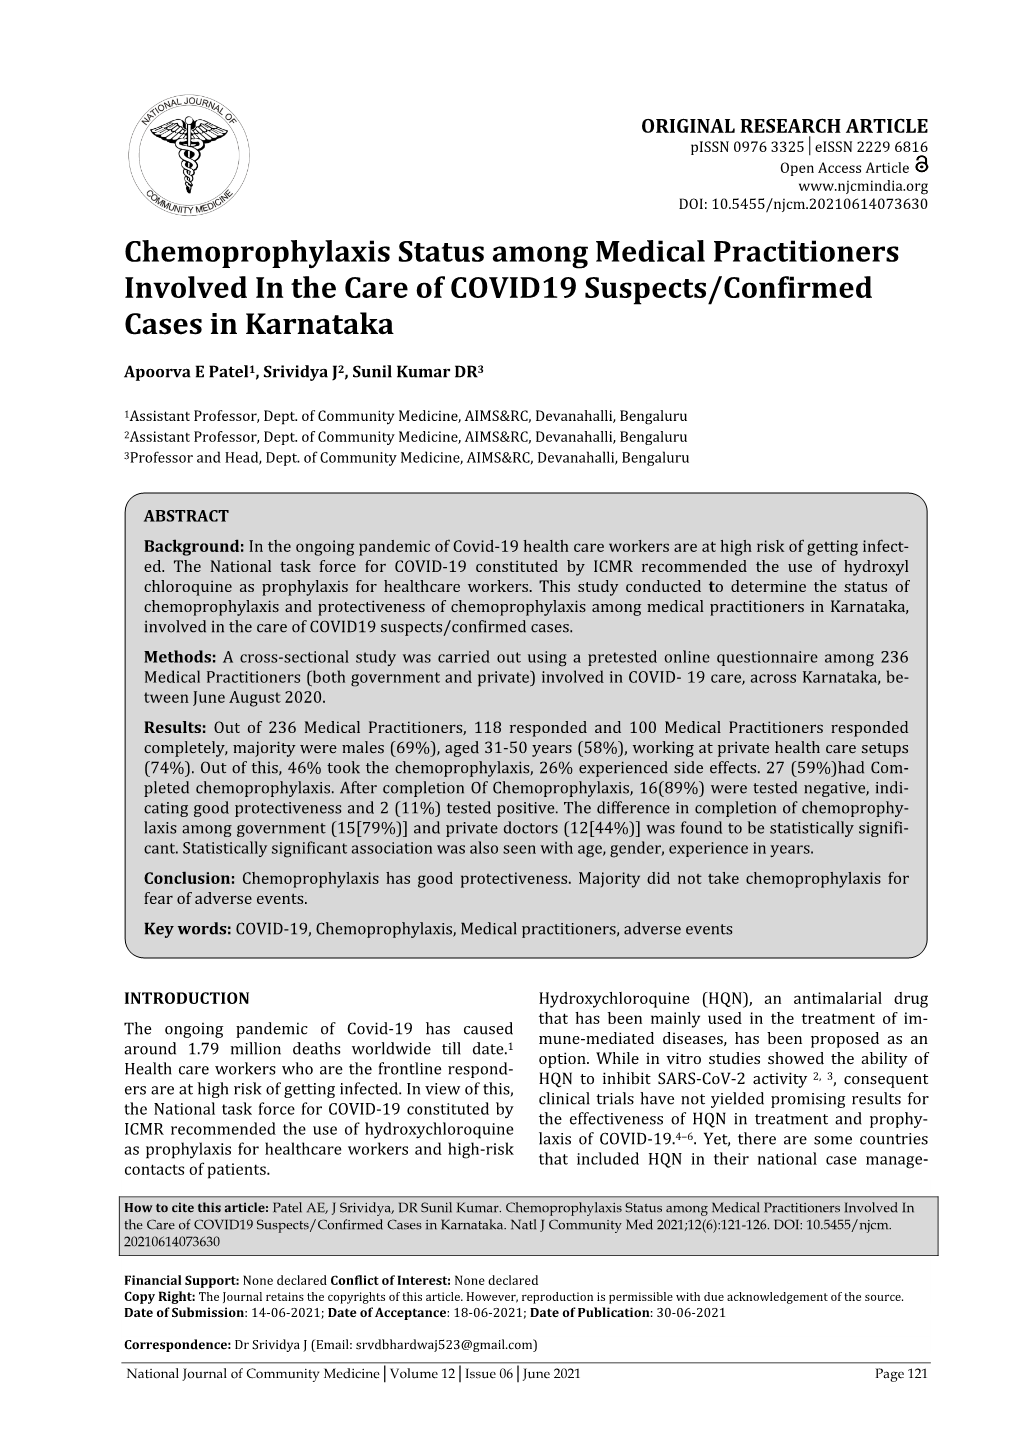 Chemoprophylaxis Status Among Medical Practitioners Involved in the Care of COVID19 Suspects/Confirmed Cases in Karnataka